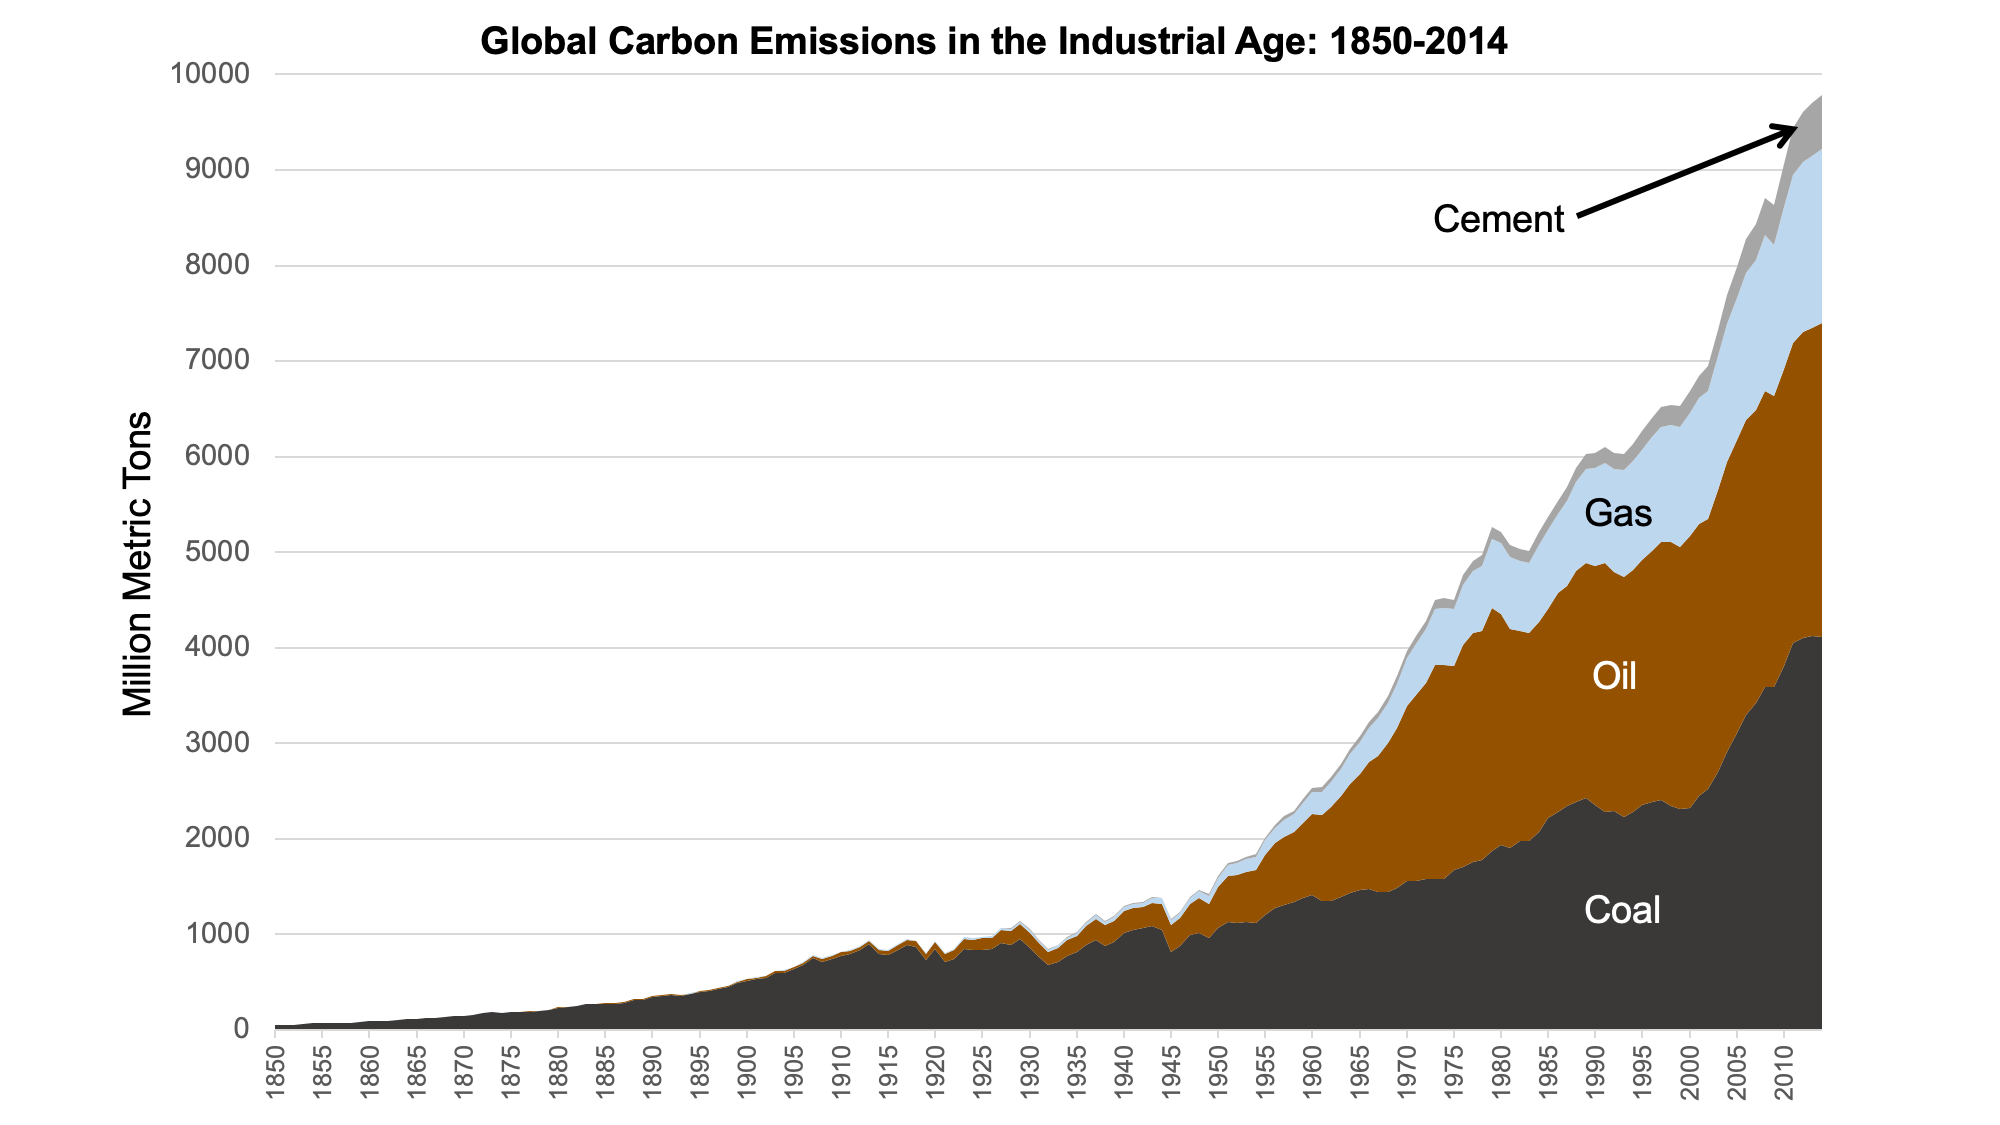 Graph showing the contributions of different types of fossil fuels to global carbon emissions between 1850 and 2014.